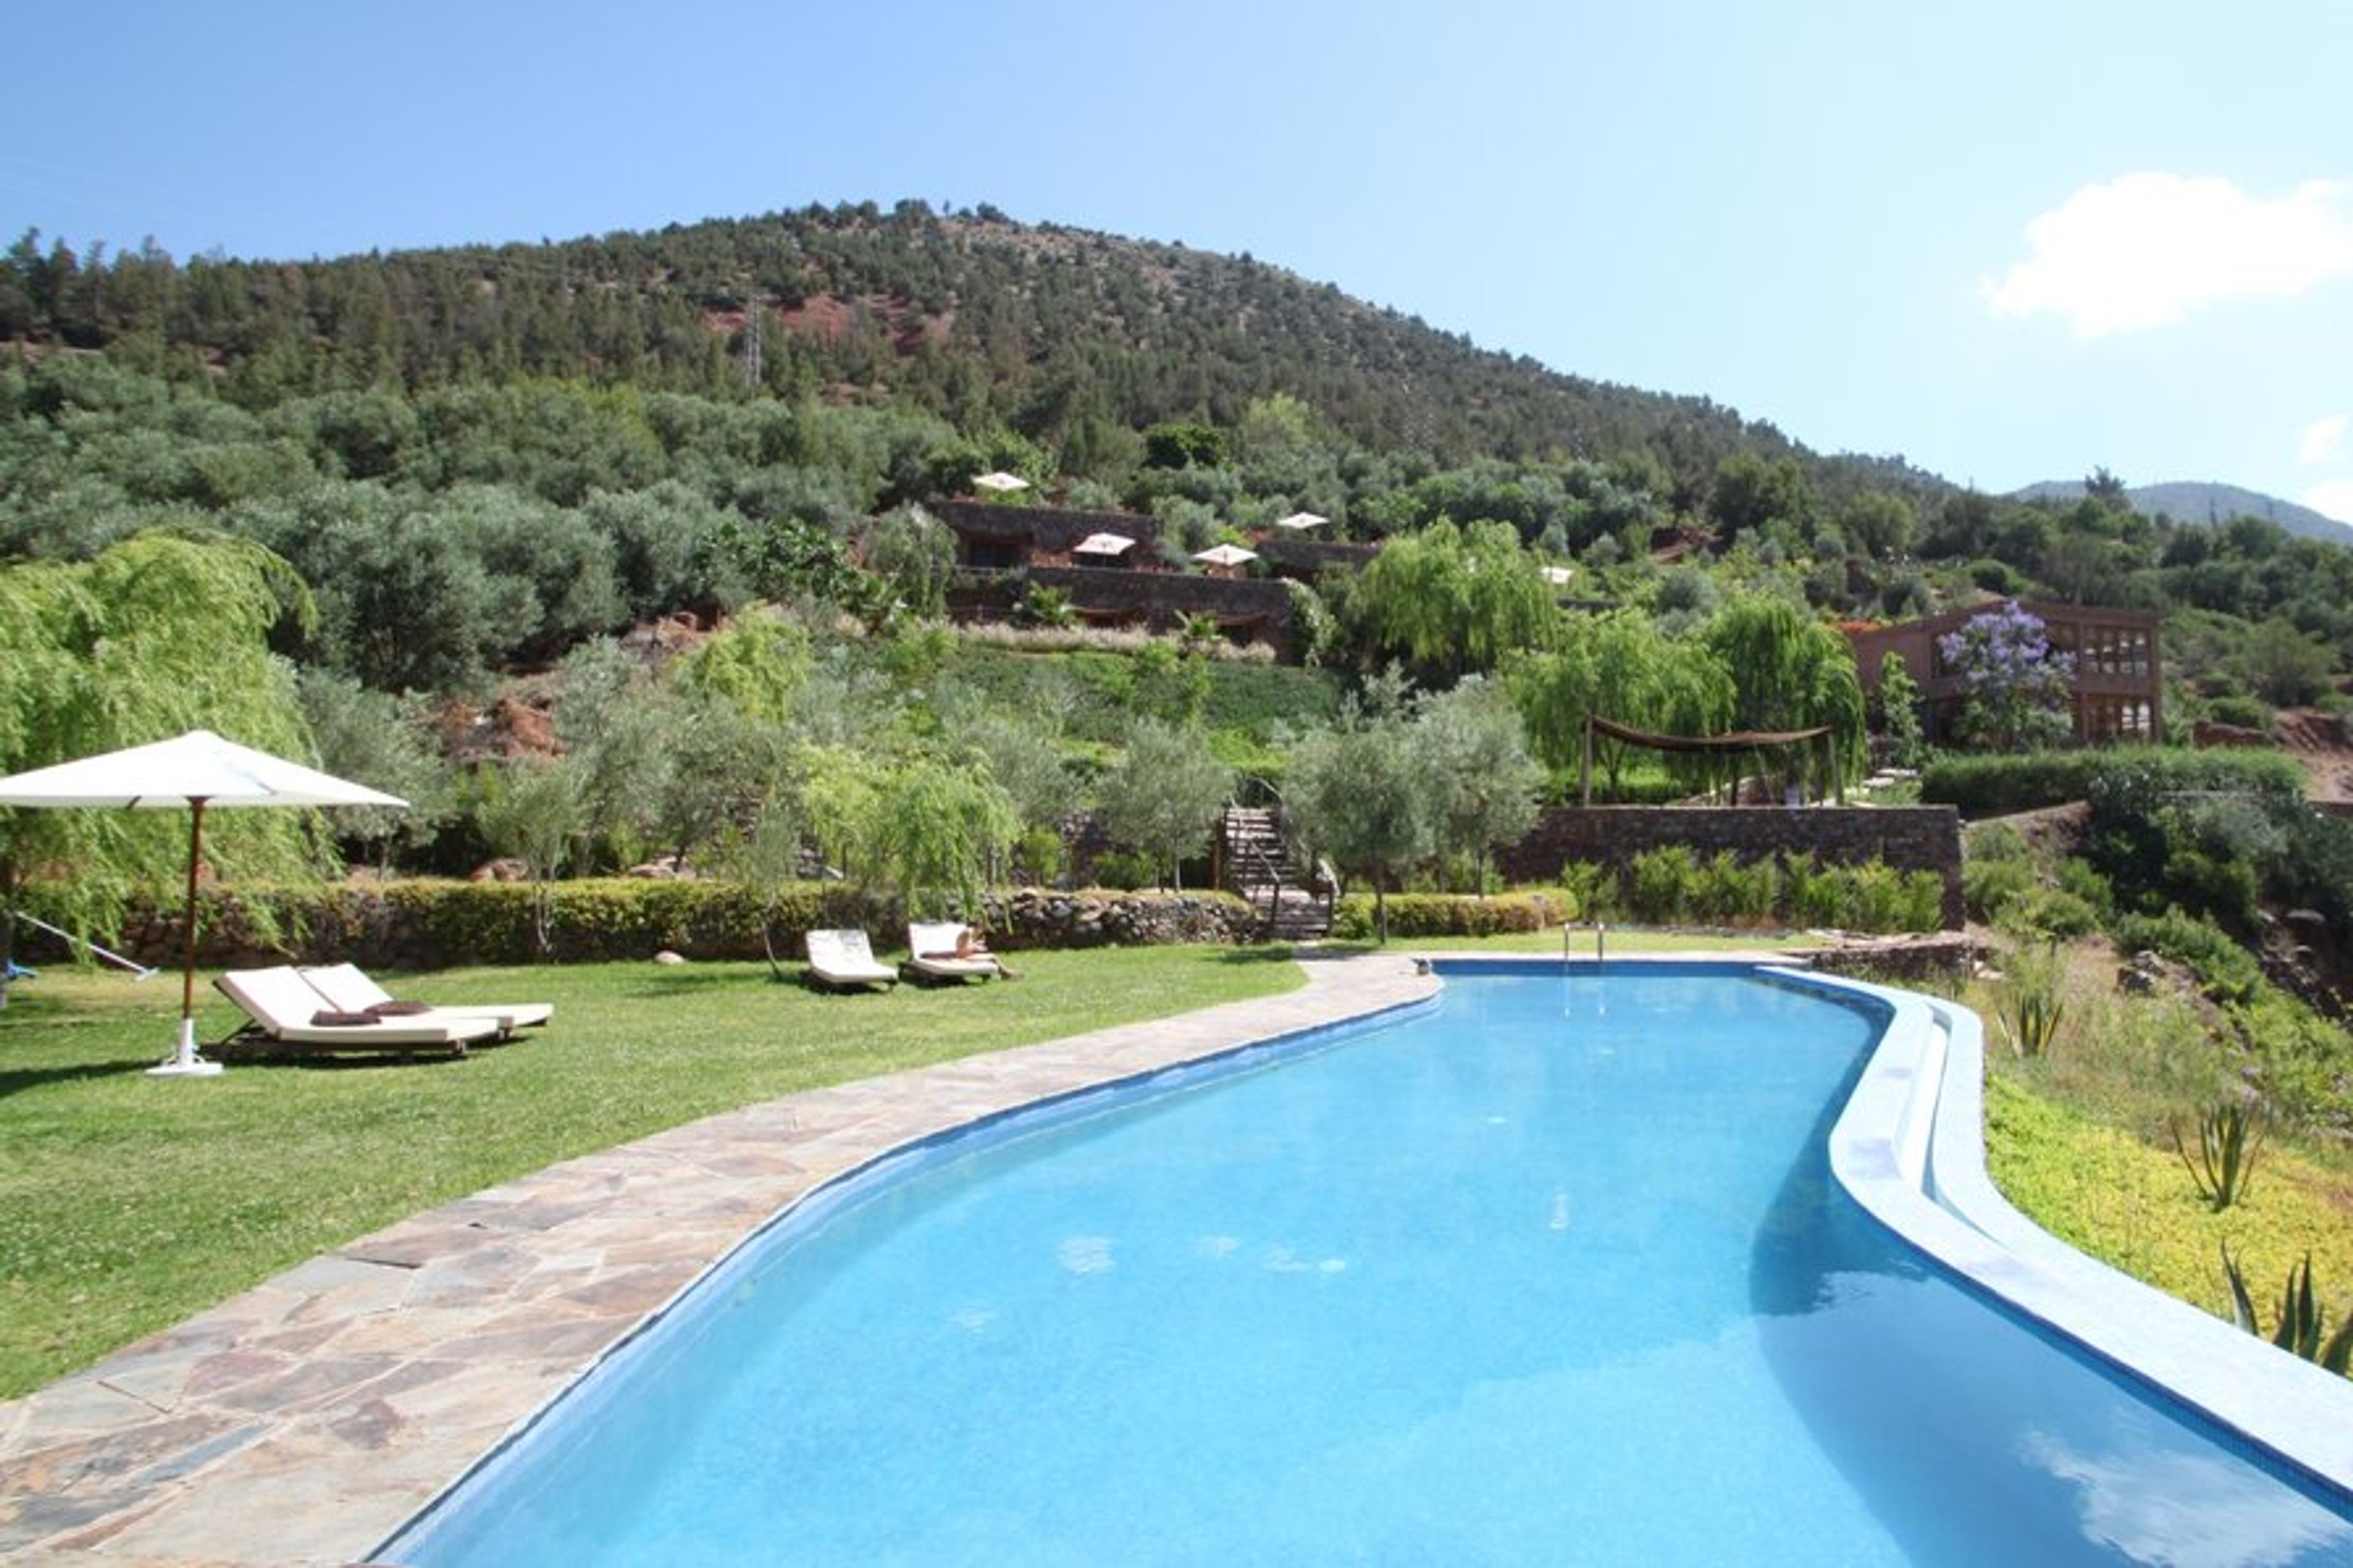 Kasbah Africa, a nature and wildlife retreat in the Atlas Mountains